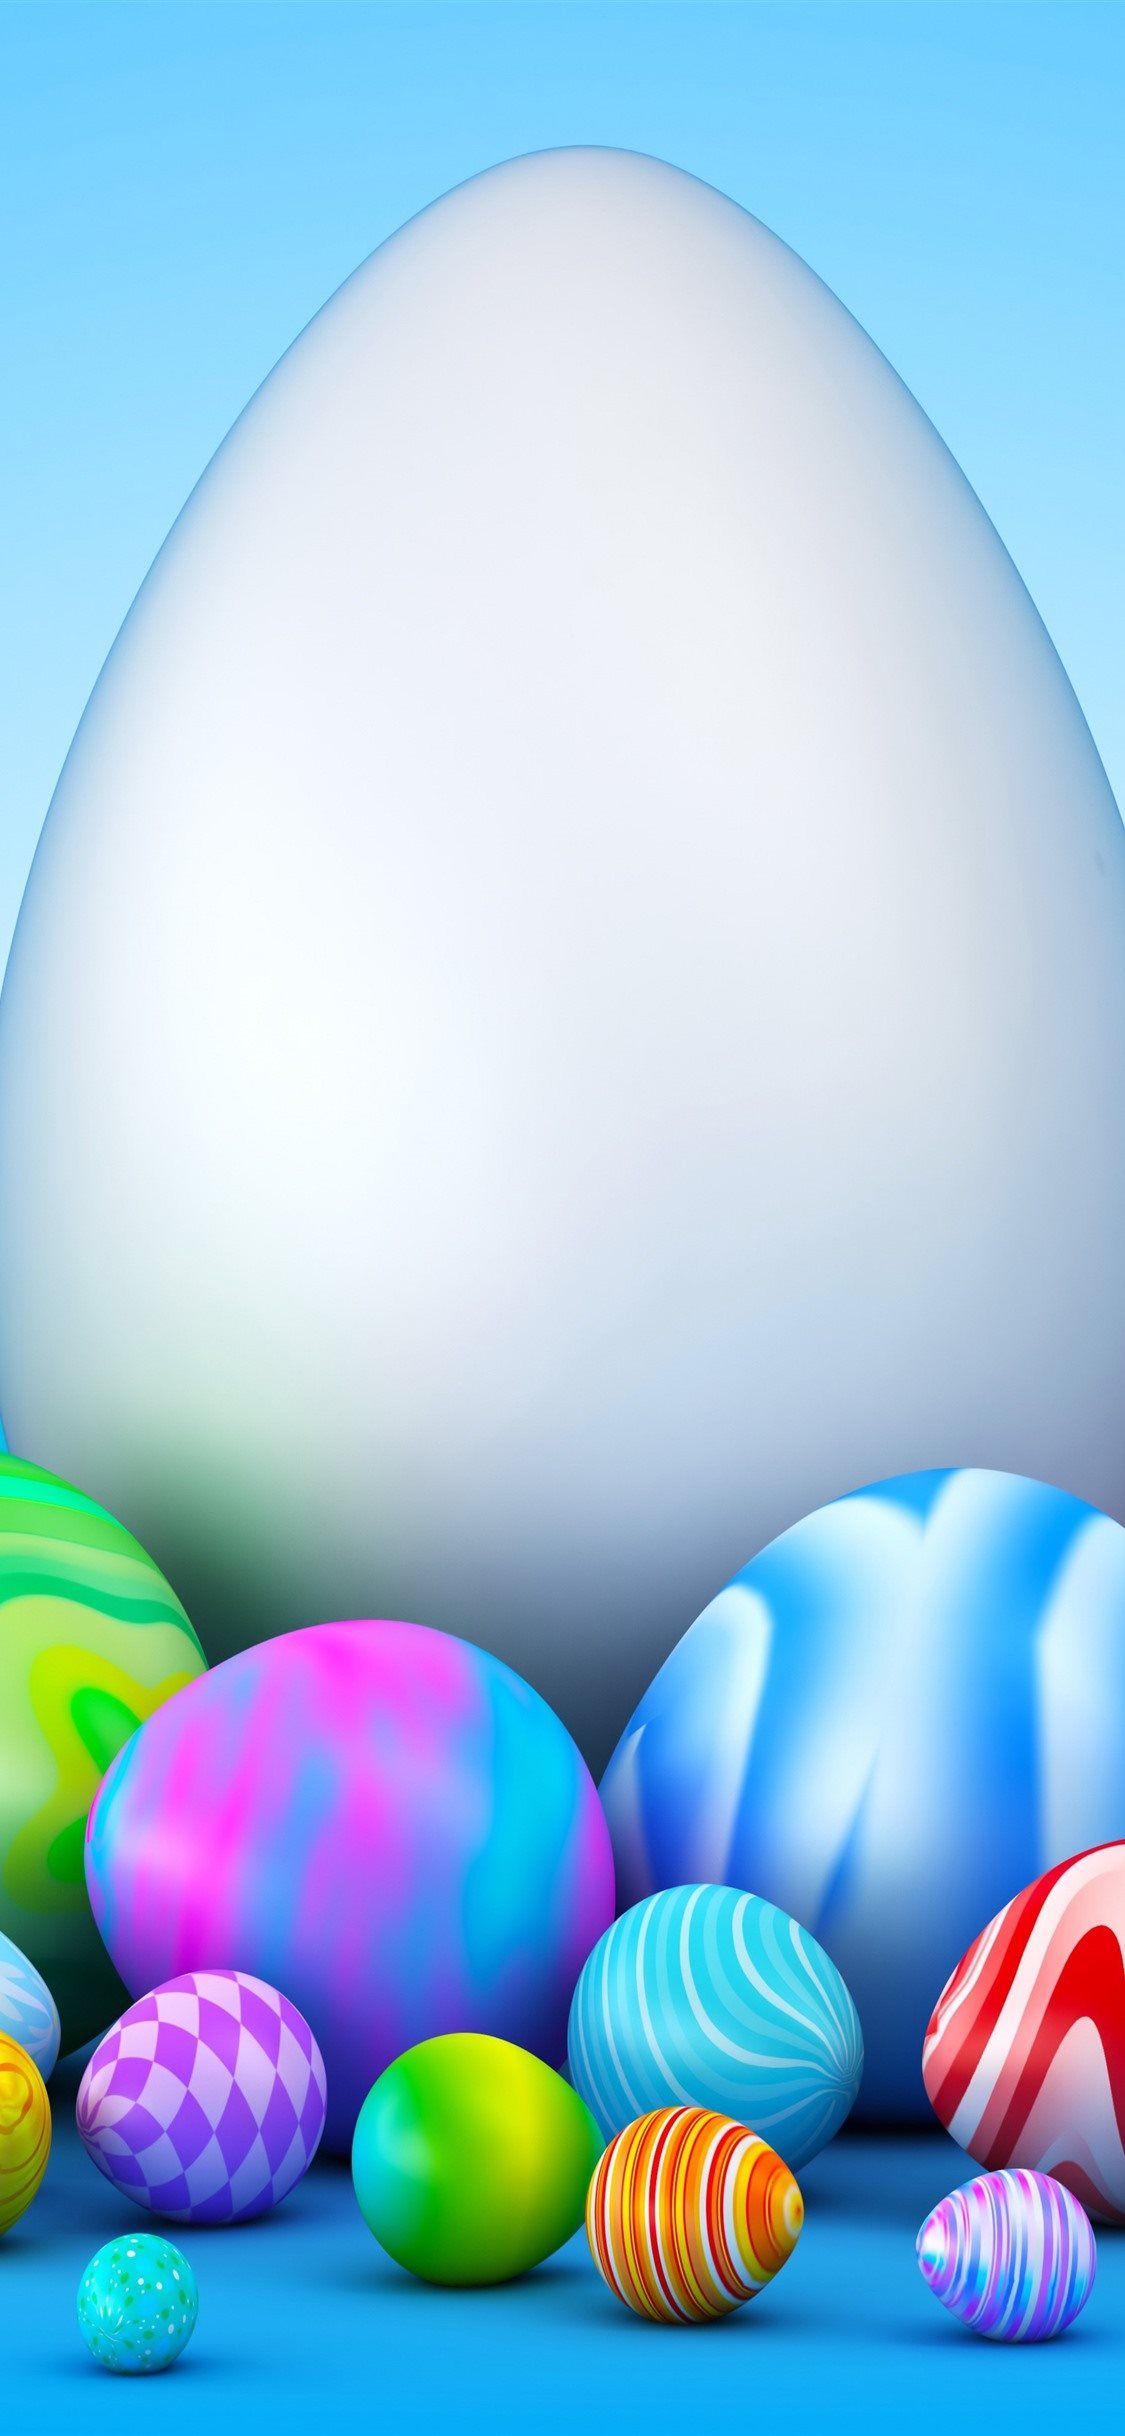 Colorful Easter eggs creative 1125x2436 wallpaper. iPhone X Wallpaper Free Download